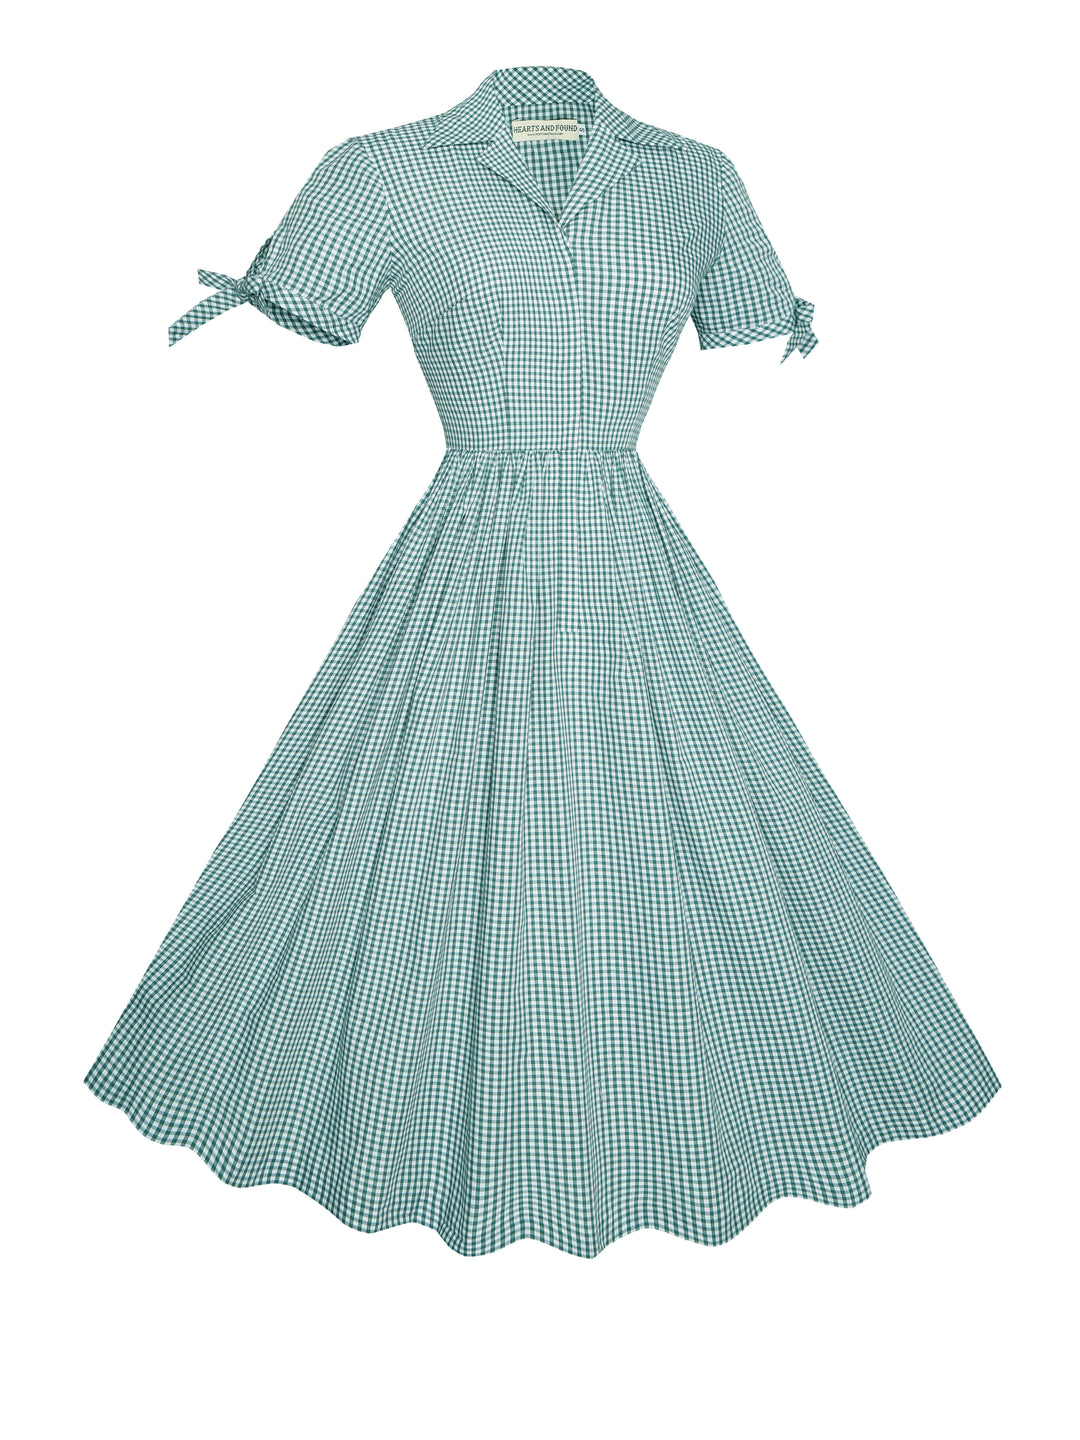 MTO - Trudie Dress in Pine Green Gingham - Small Checks